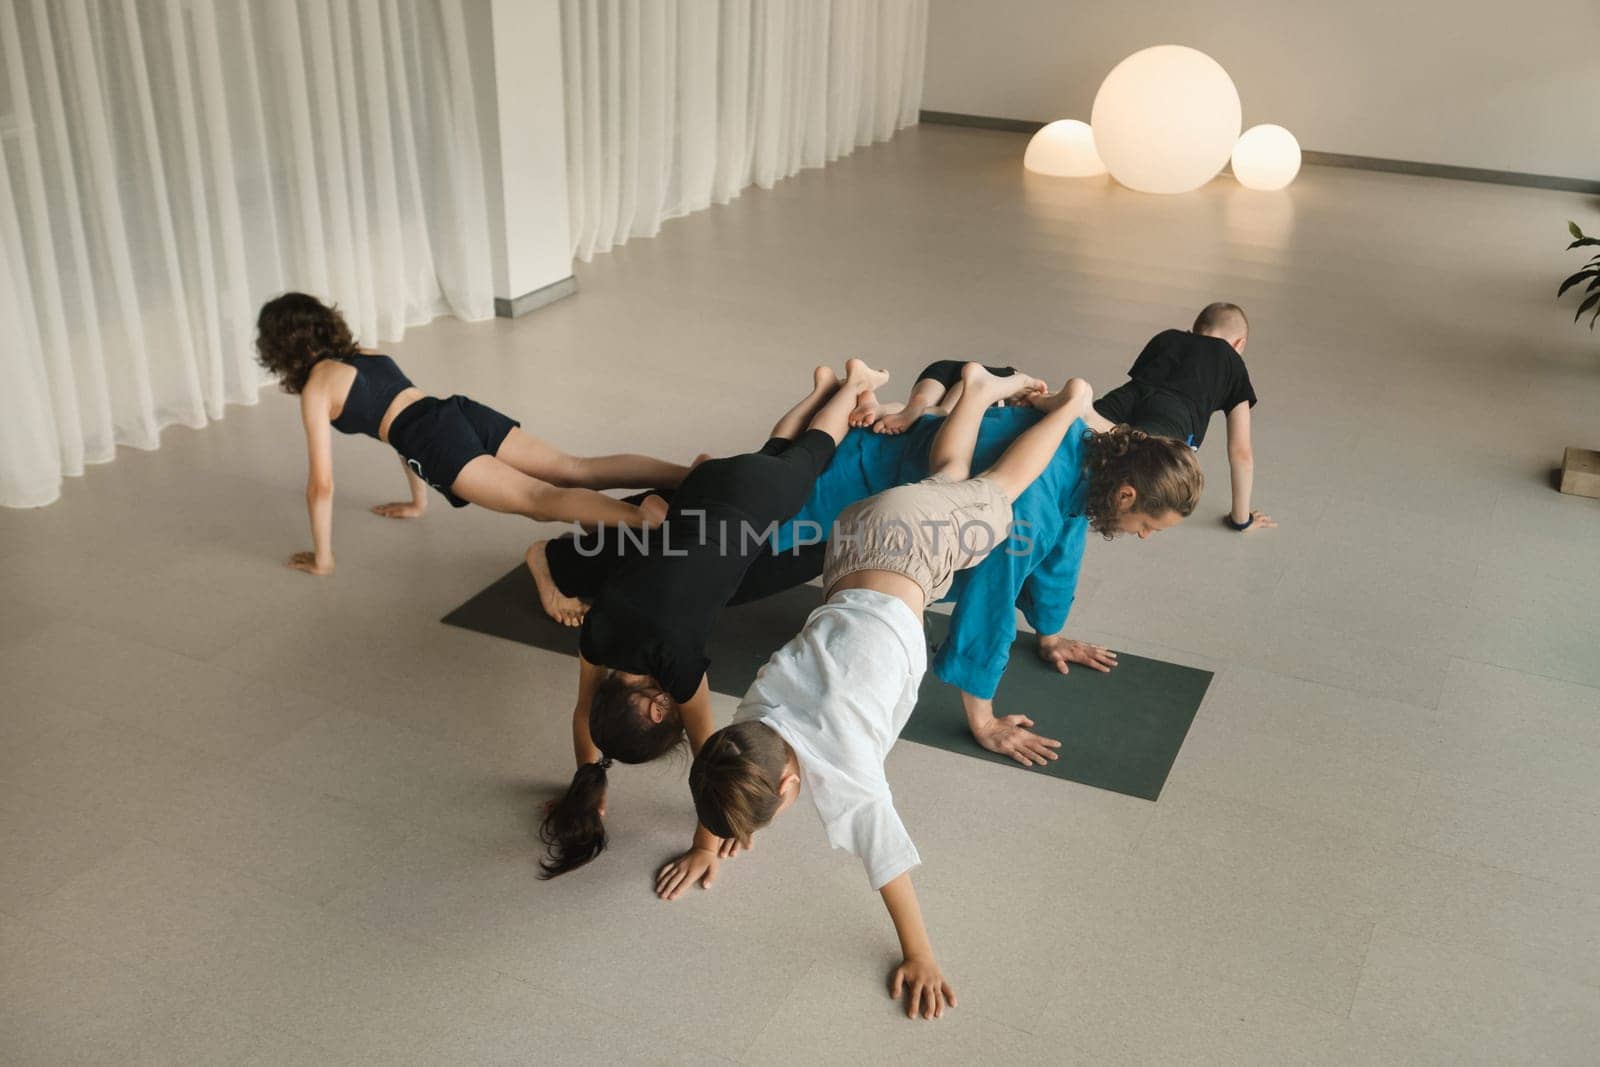 A team of children and a coach do an unusual pose at an indoor yoga workout by Lobachad